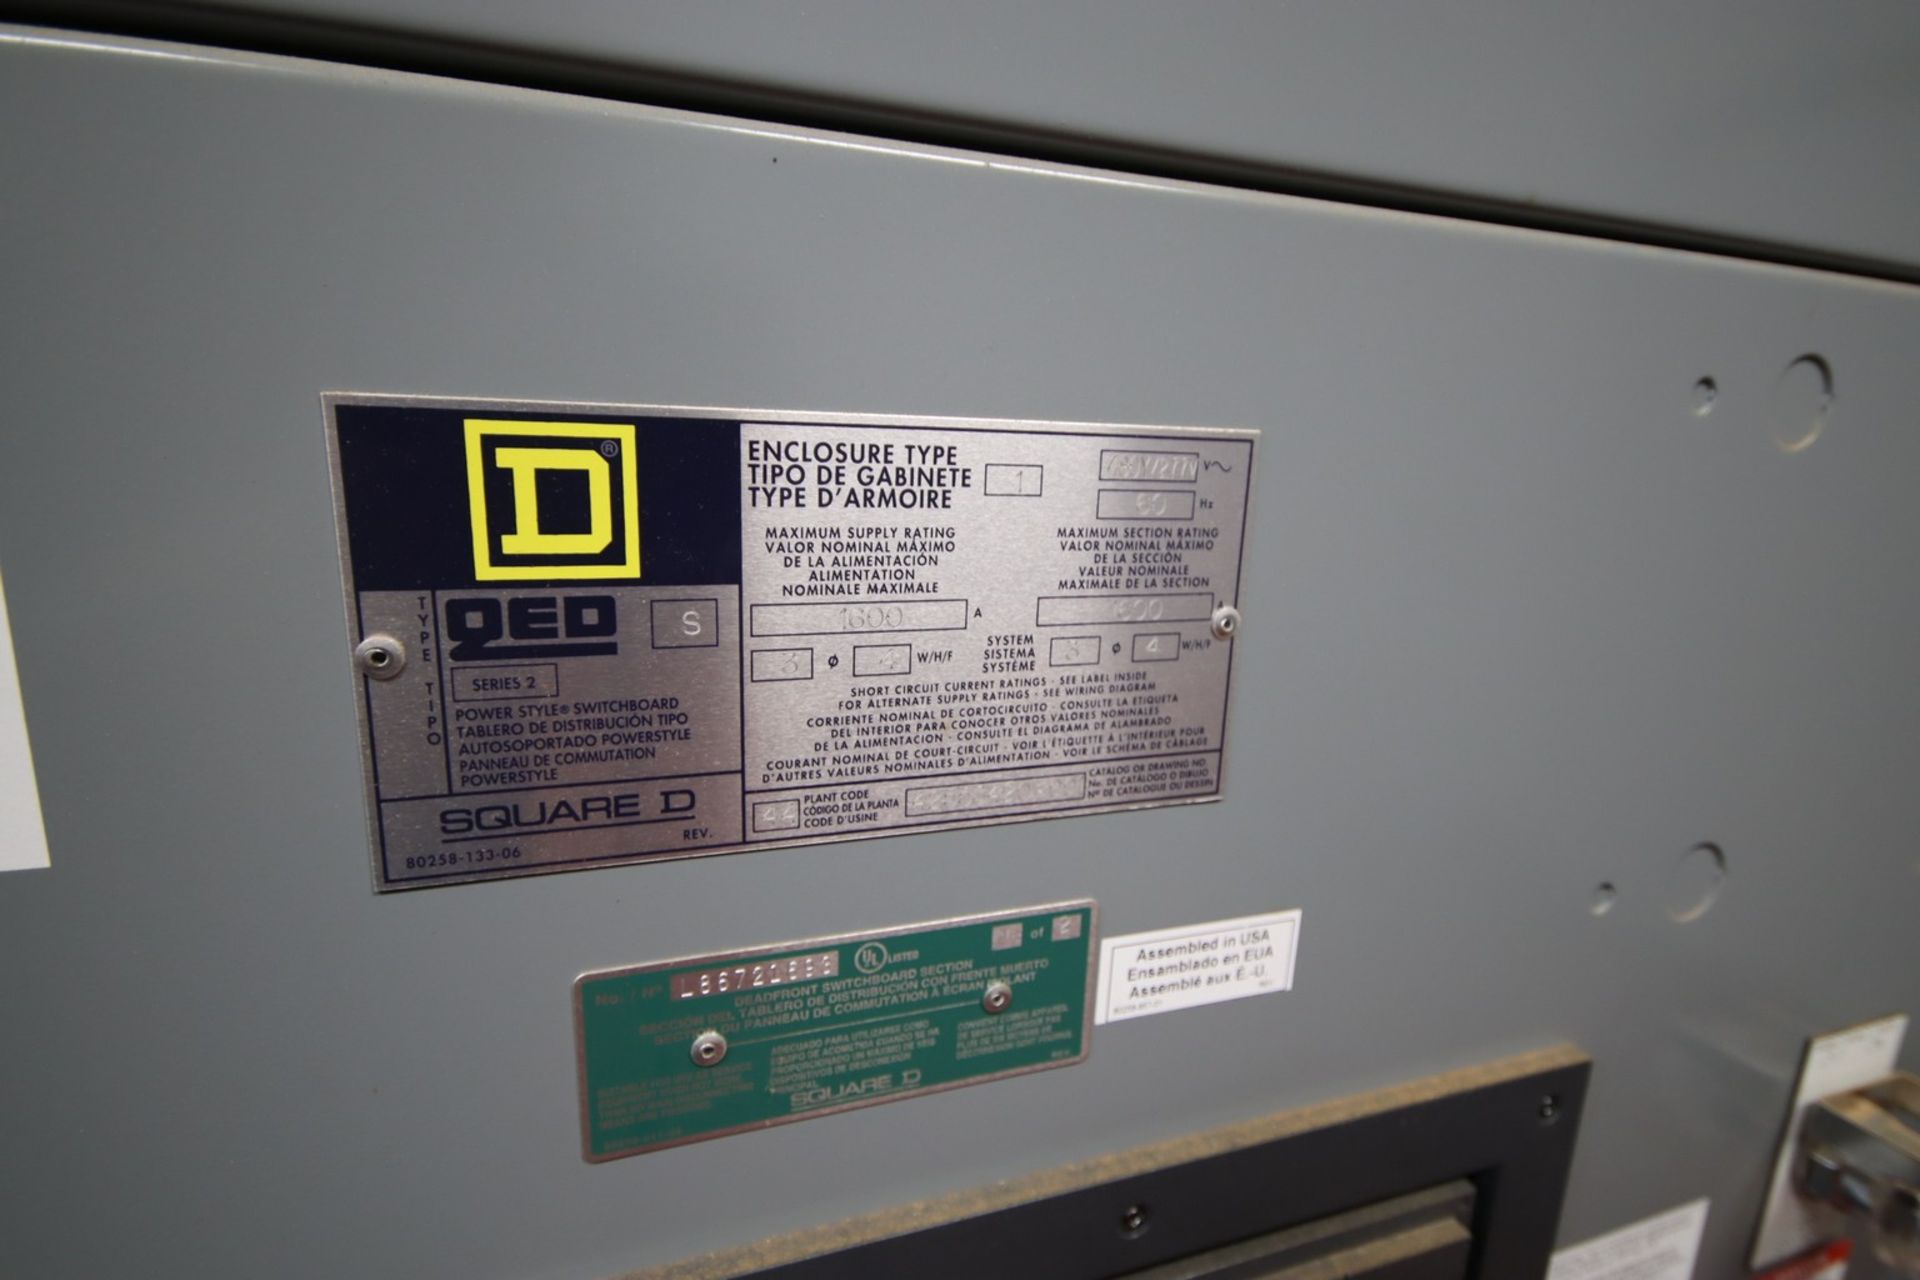 2019 Square D 1600 Amp 2 Column Switchgear, QED-S Series 2, 480Y/277V - Image 2 of 7